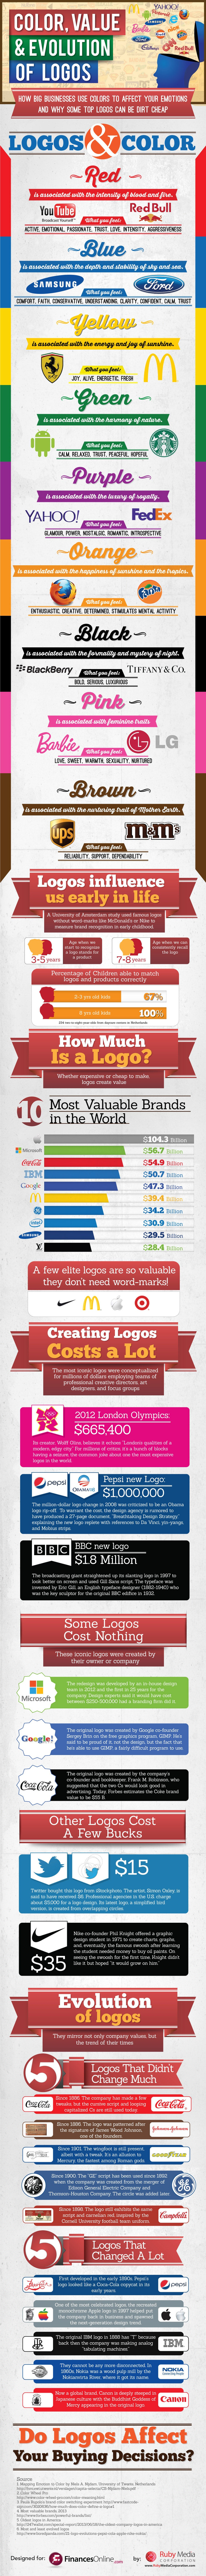 1395420147-what-does-color-logo-say-about-business-infographic.jpg